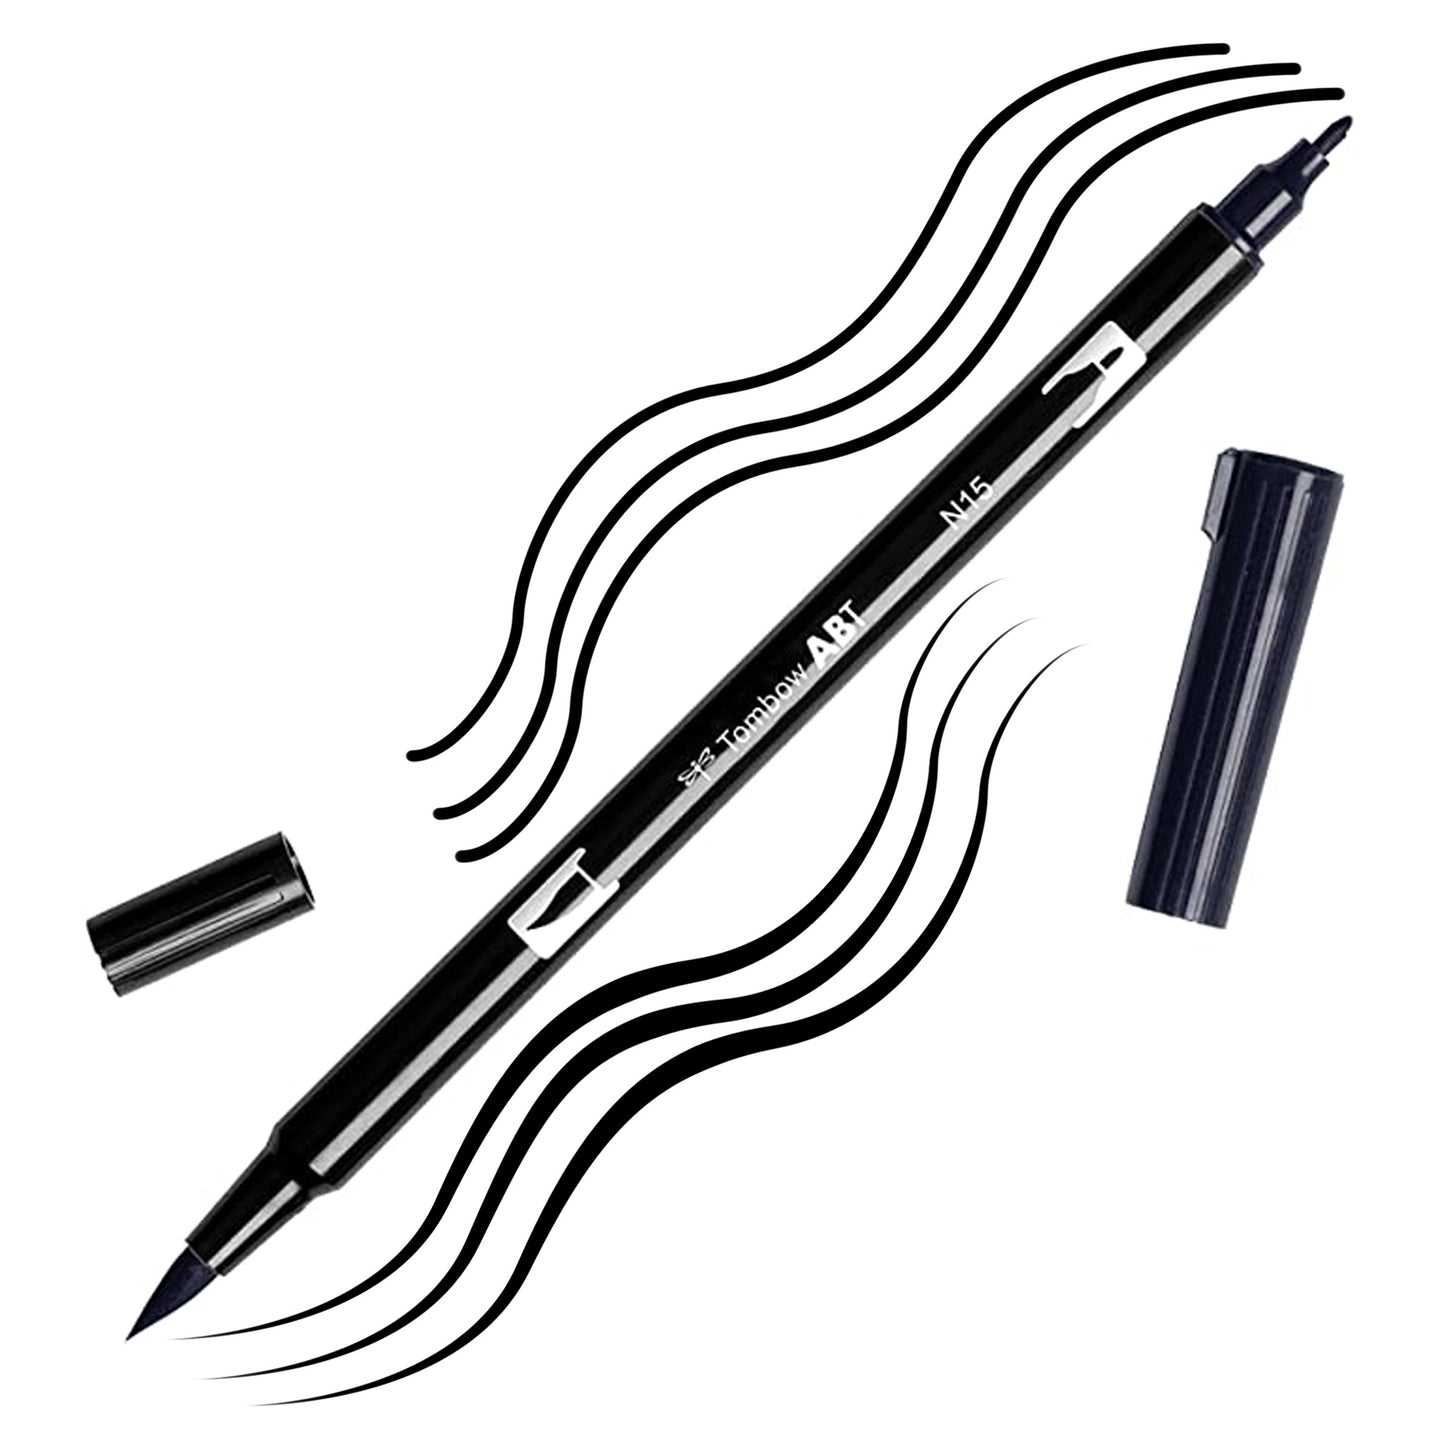 Black Tombow double-headed brush-pen with a flexible nylon fiber brush tip and a fine tip against a white background with black strokes